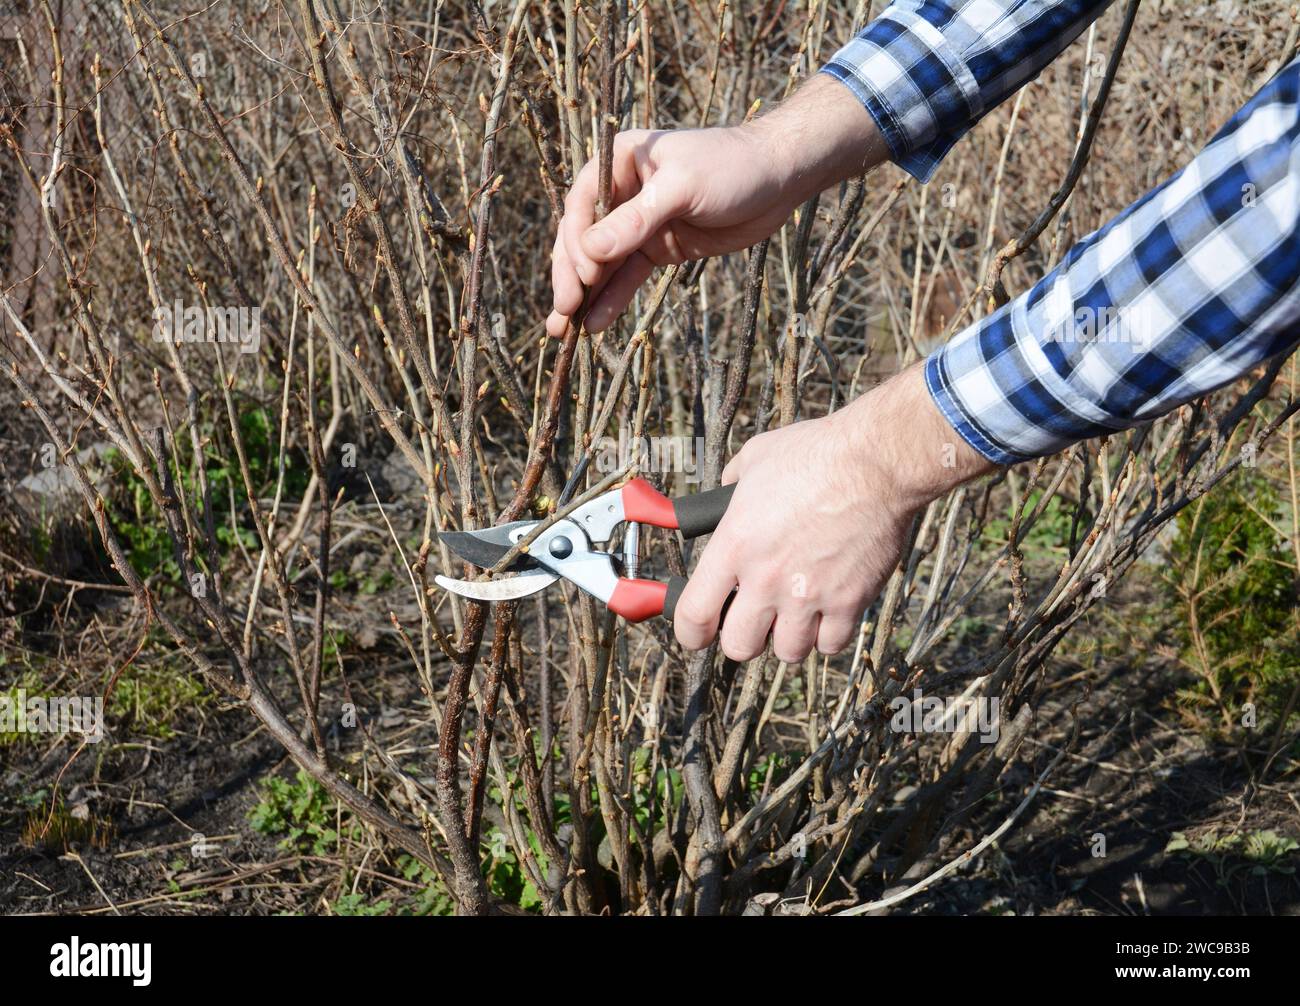 Gardener hands cutting blackcurrant bush with bypass secateurs in early spring. Stock Photo